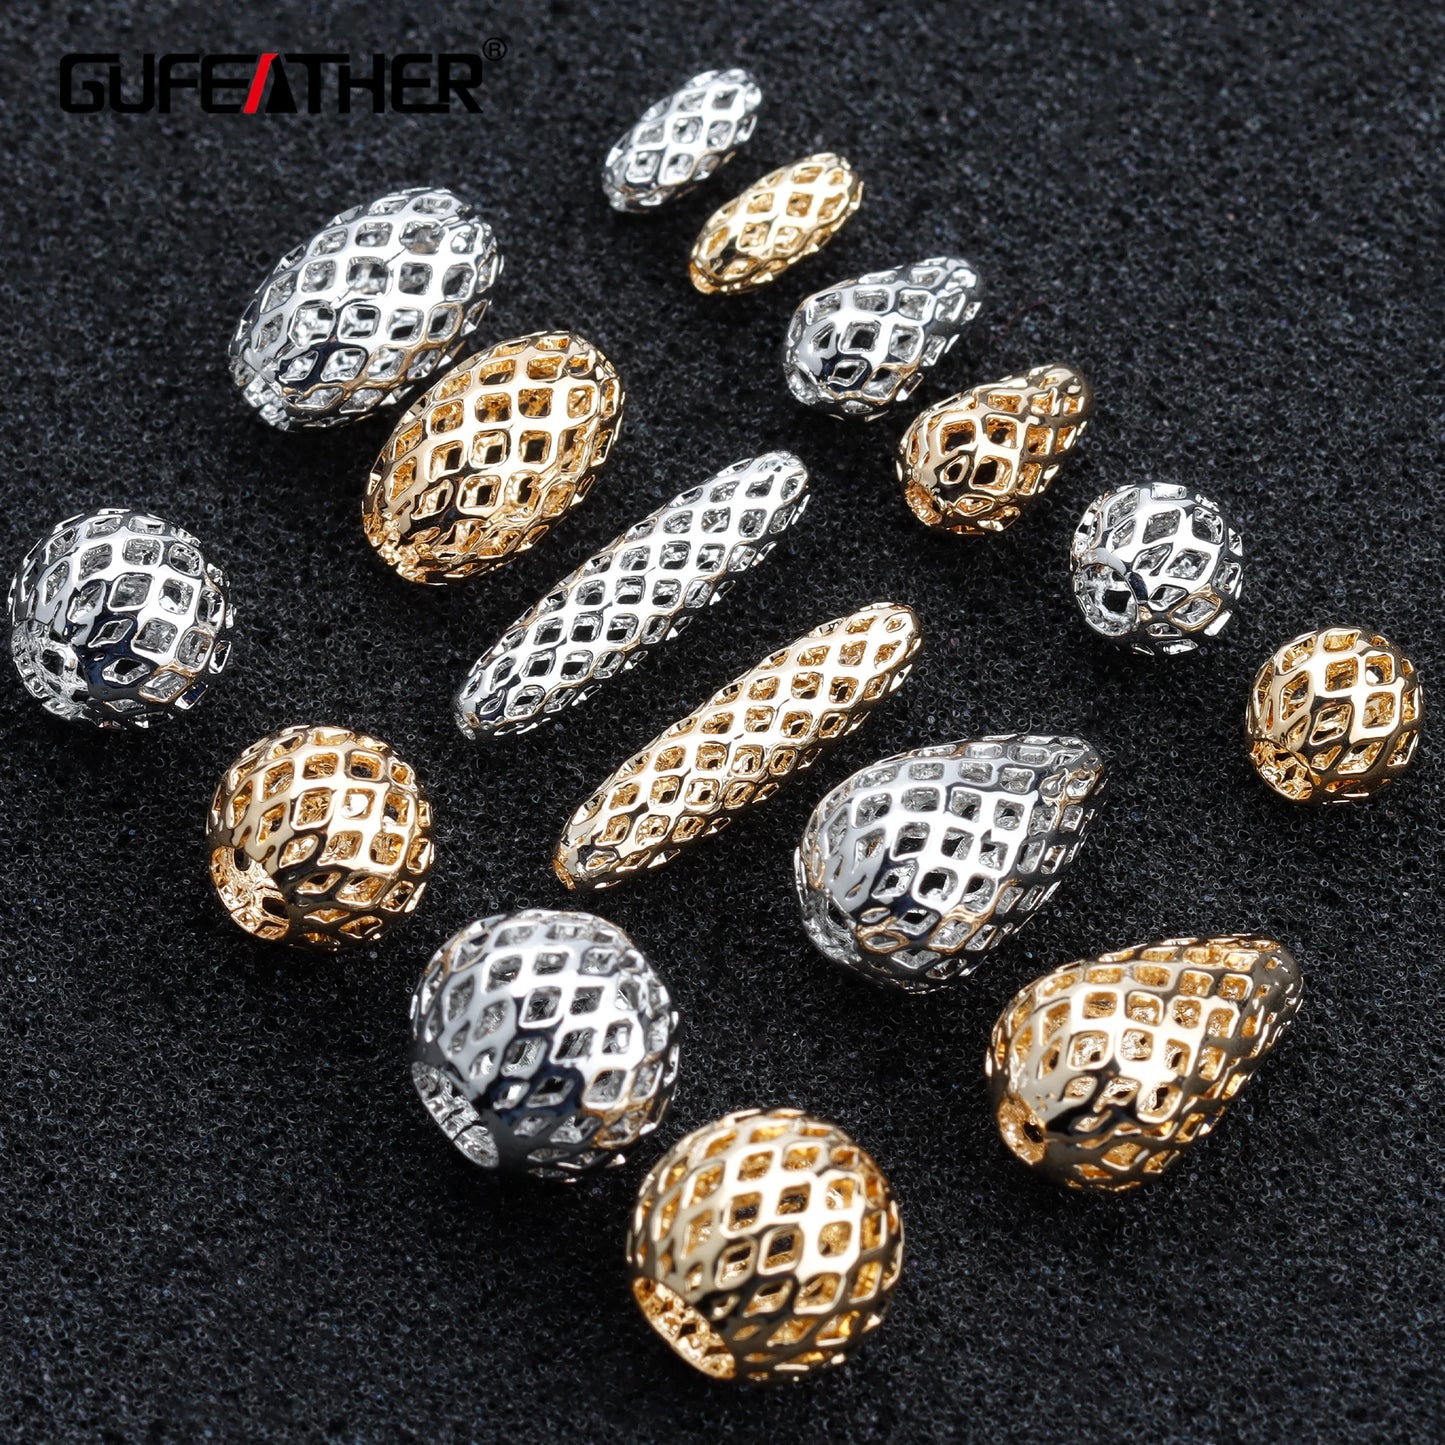 GUFEATHER M905,jewelry accessories,pass REACH,nickel free,18k gold plated,copper,charms,diy earrings,jewelry making,20pcs/lot